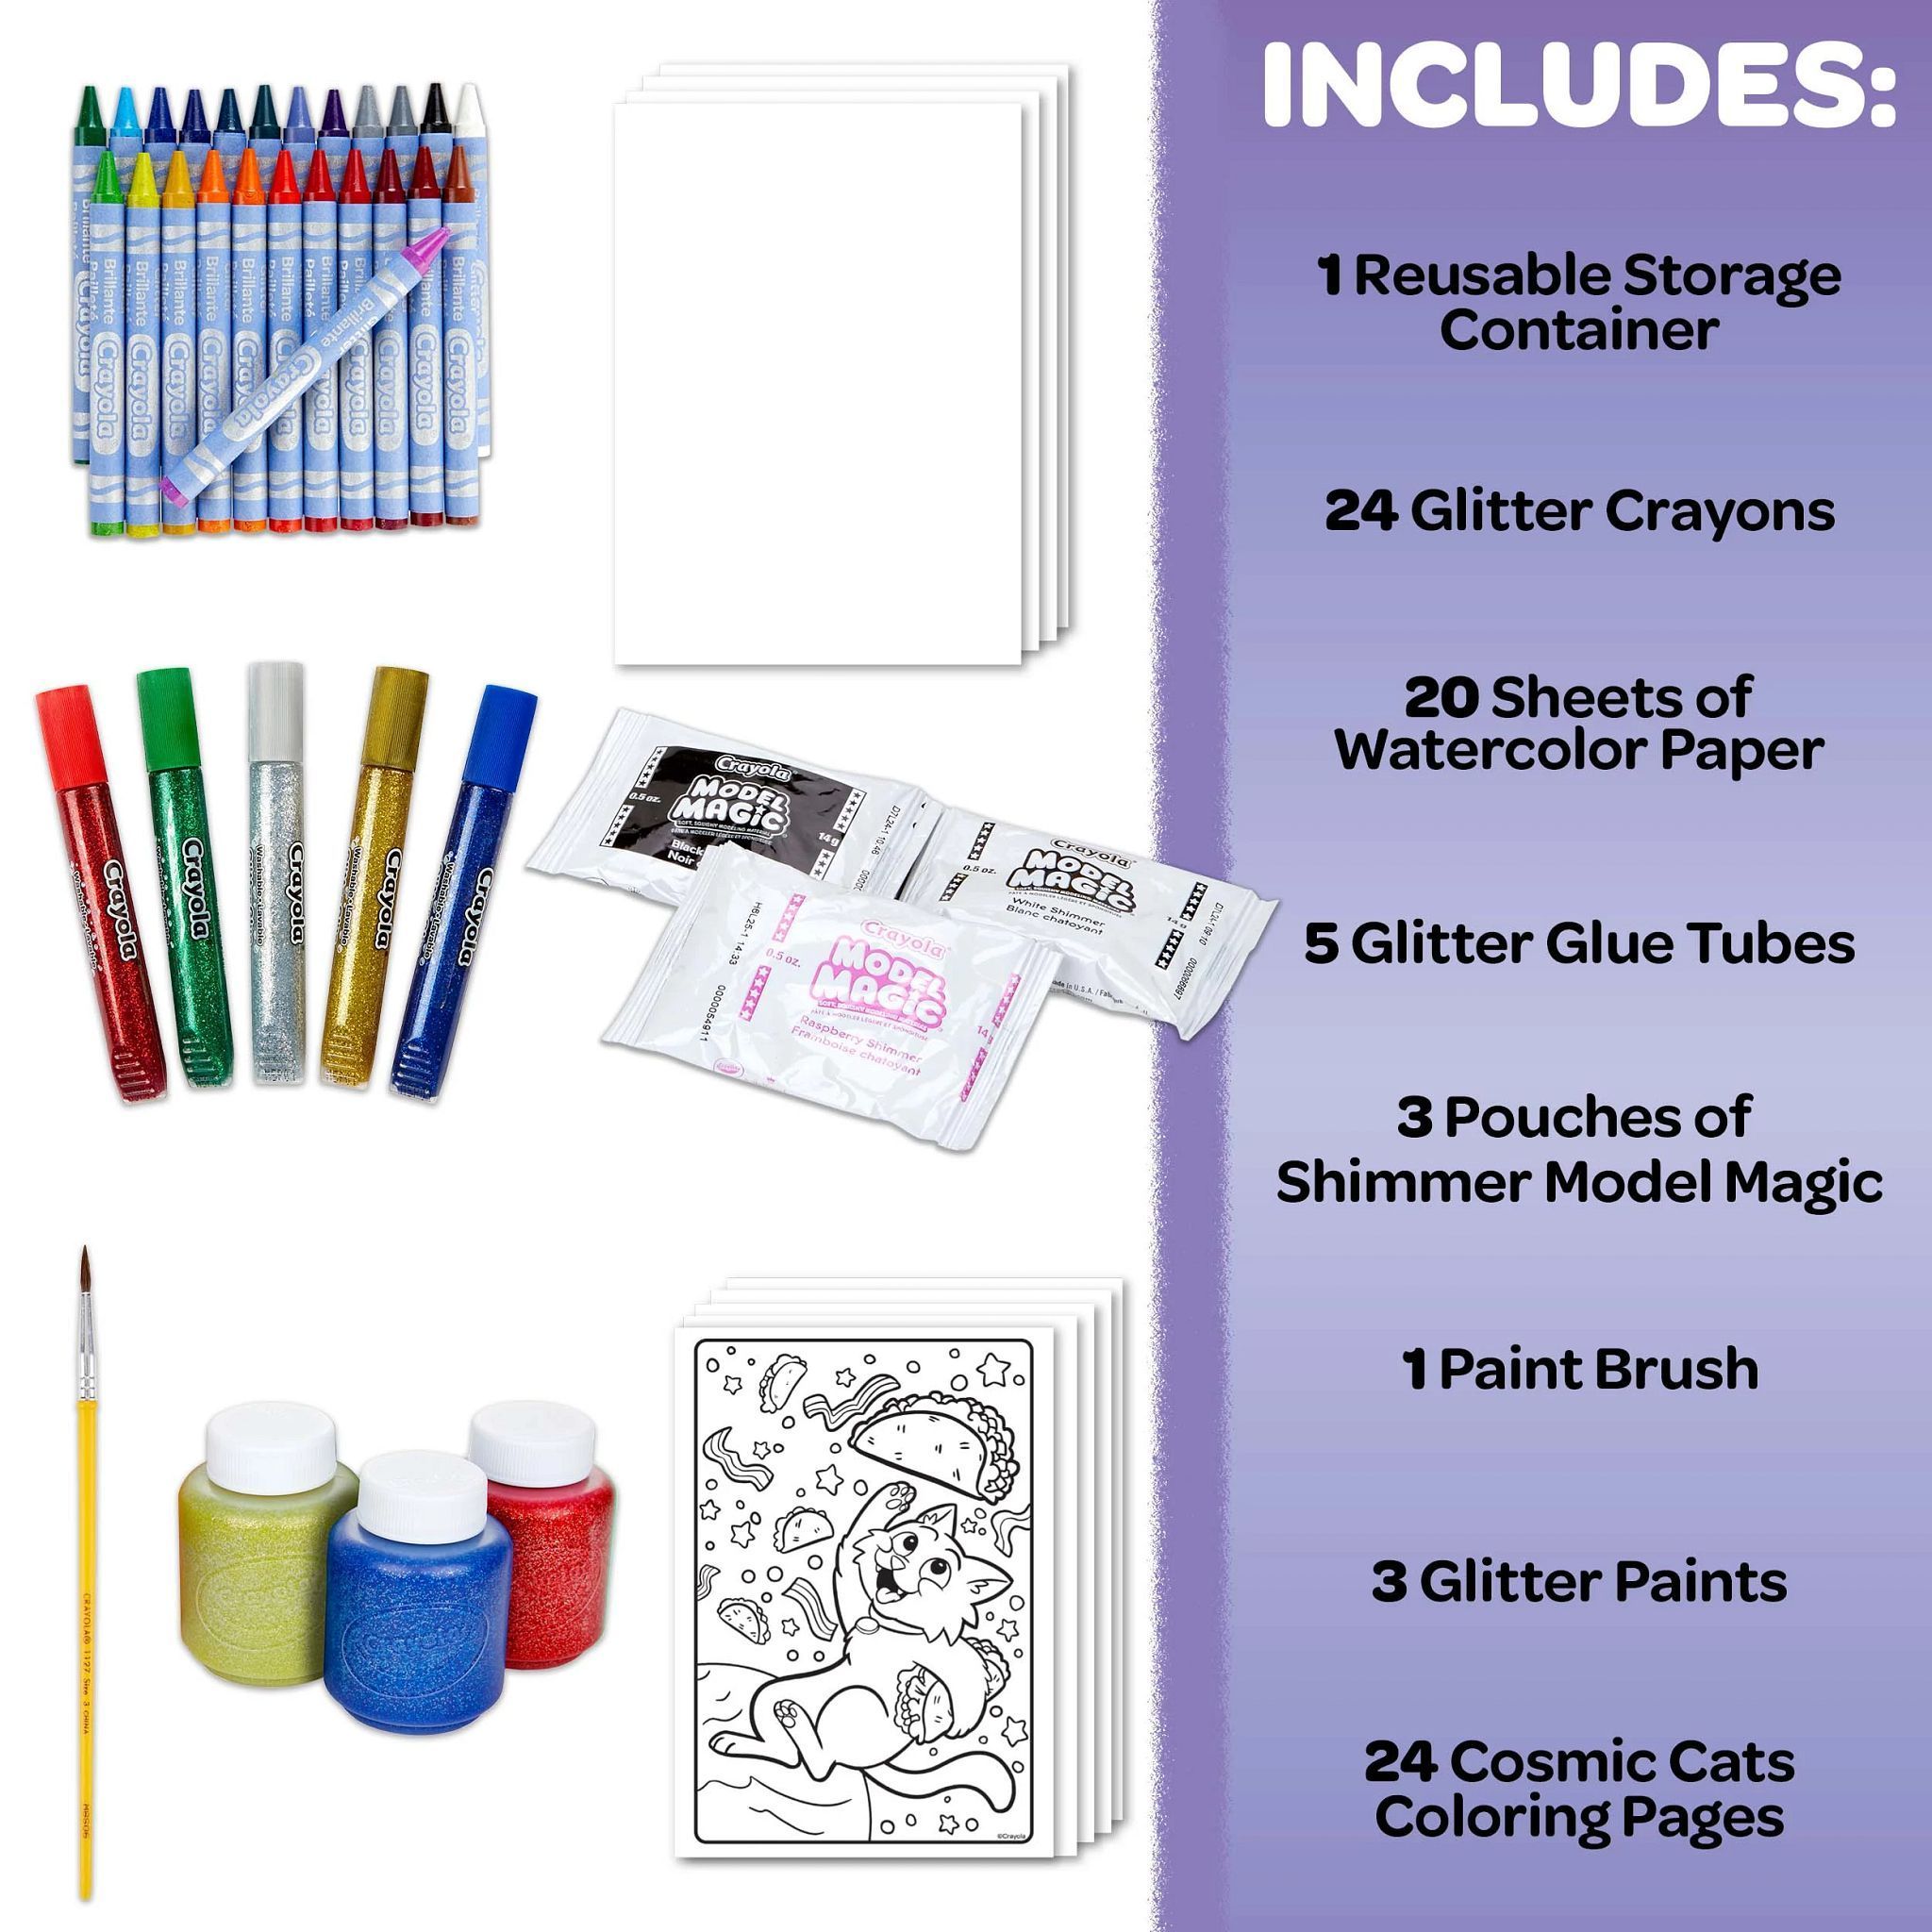 Crayola Glitter Arts and Crafts Kit, 80+ School Supplies, Glitter Toy, Creative Gift for Unisex Child - image 2 of 6